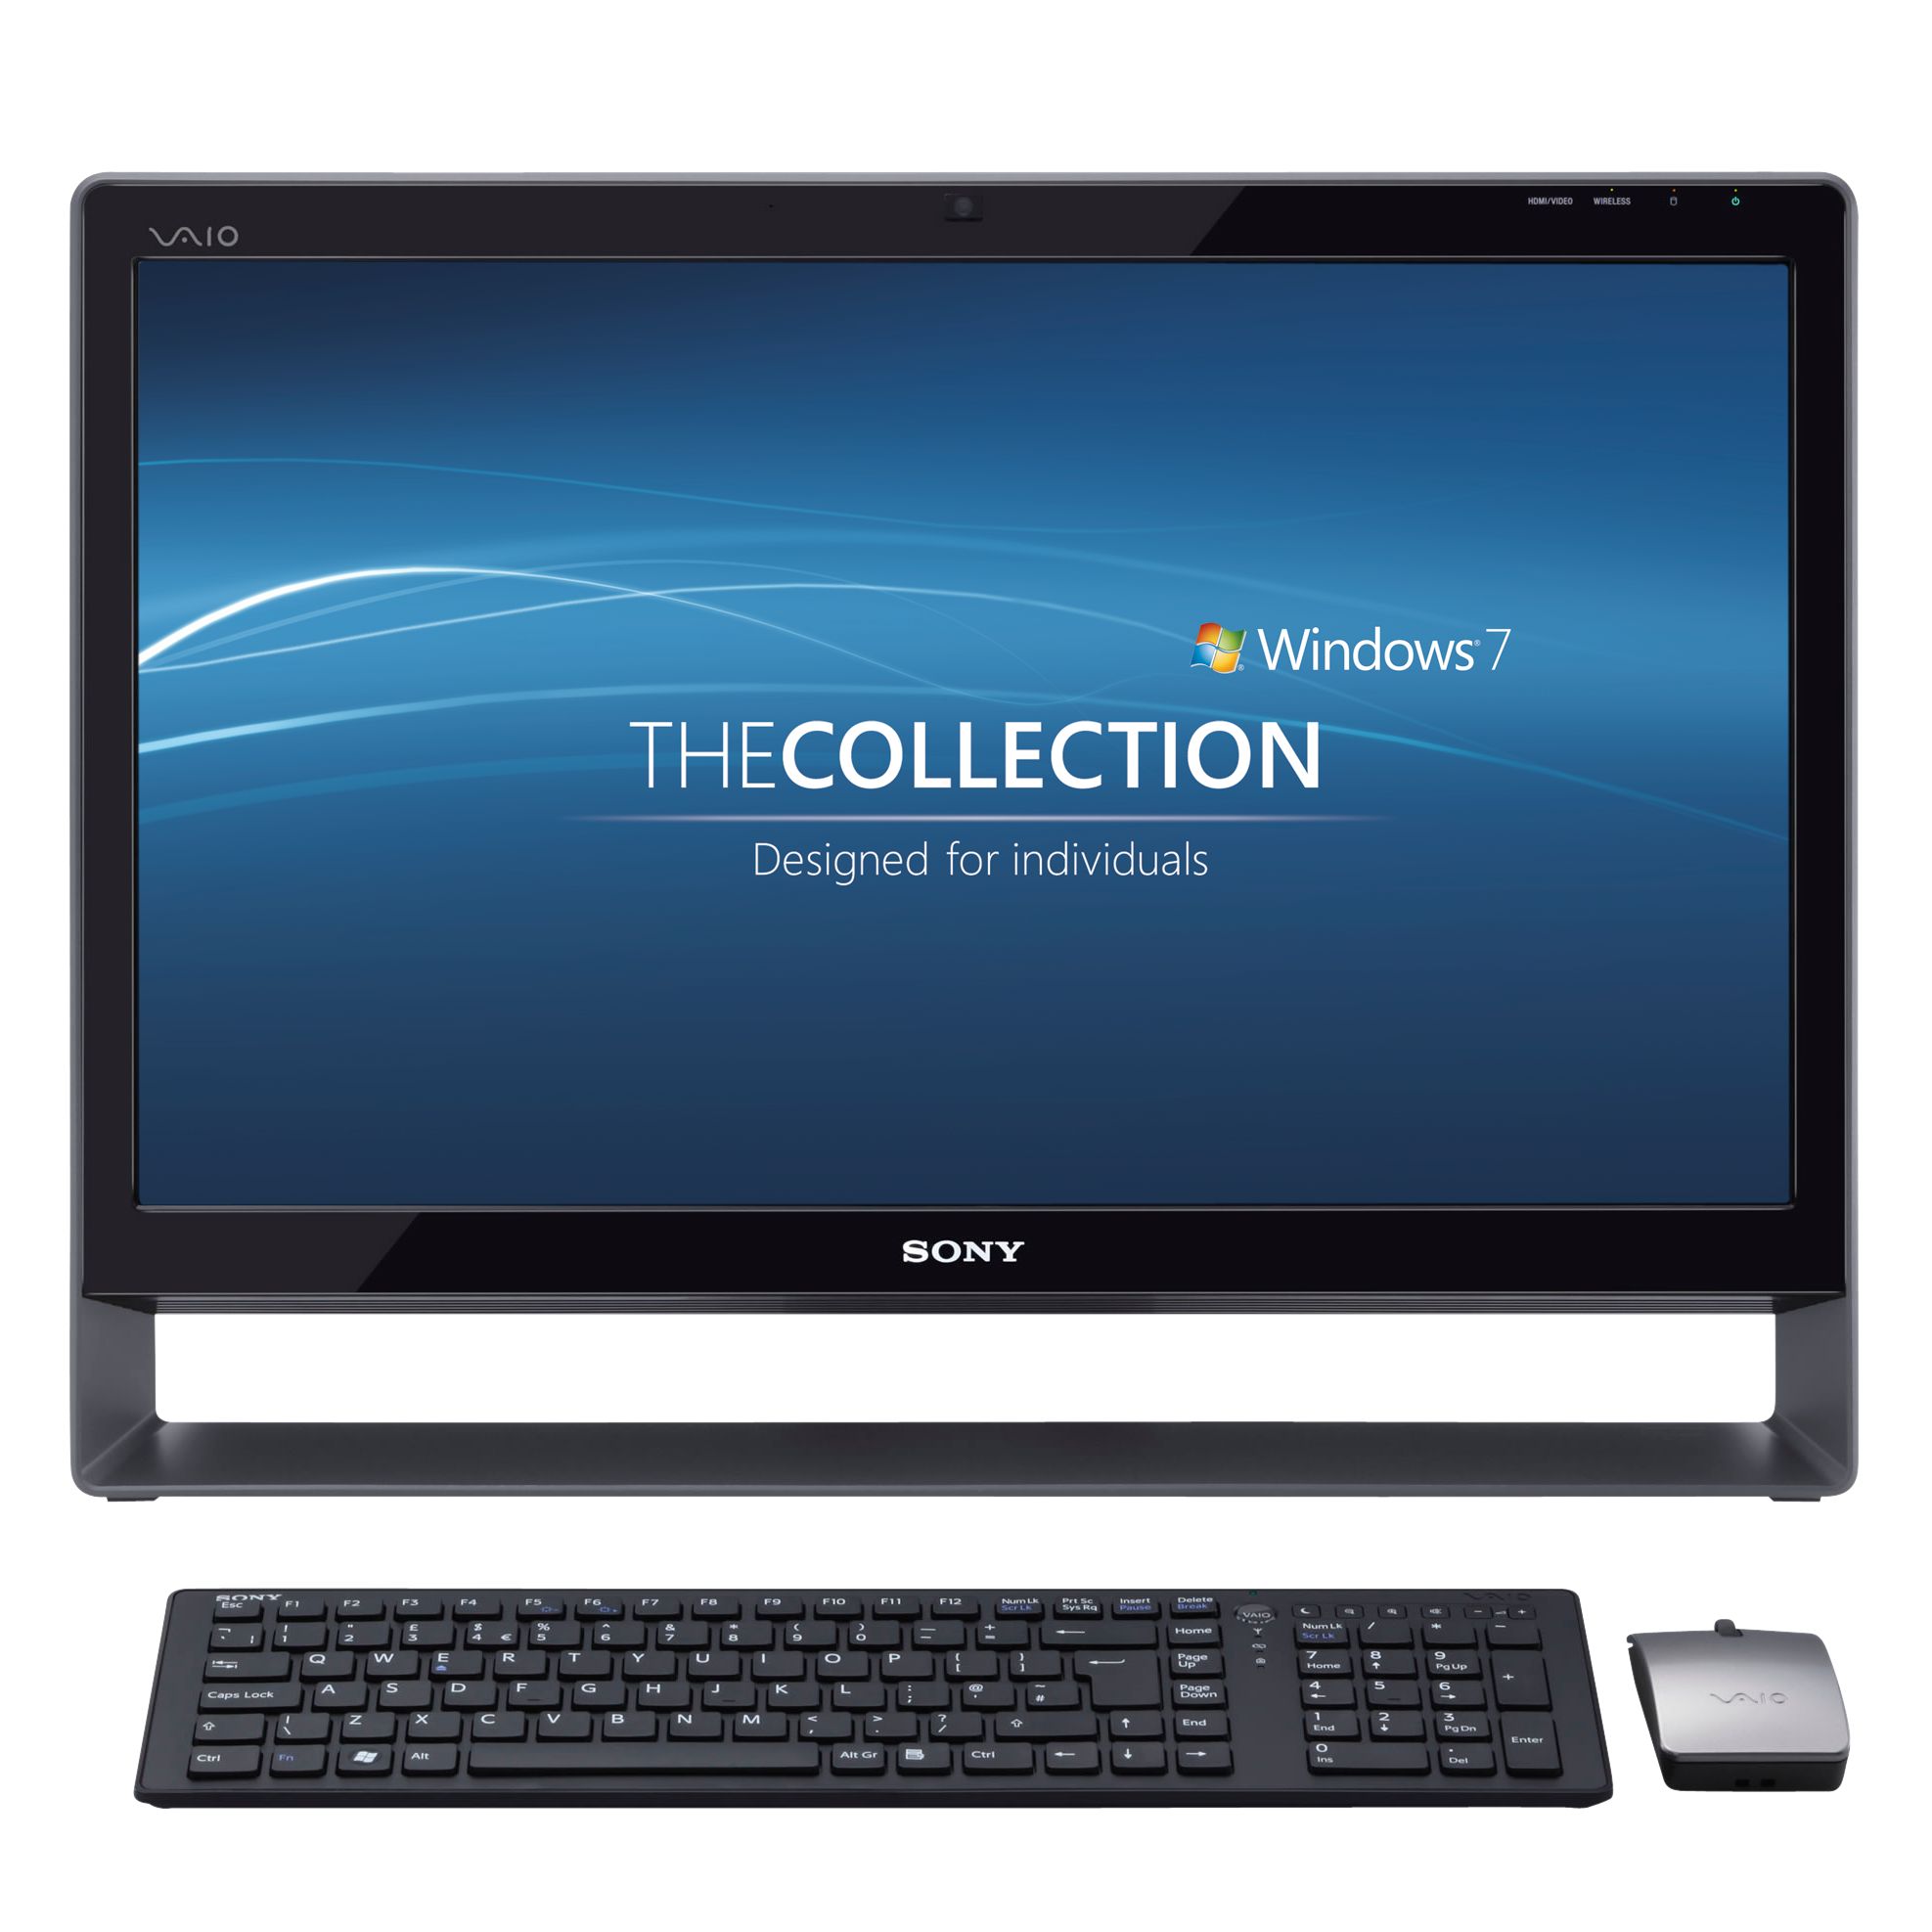 Sony Vaio VPC-L13M1E/S Desktop PC with 24 Inch Screen at John Lewis